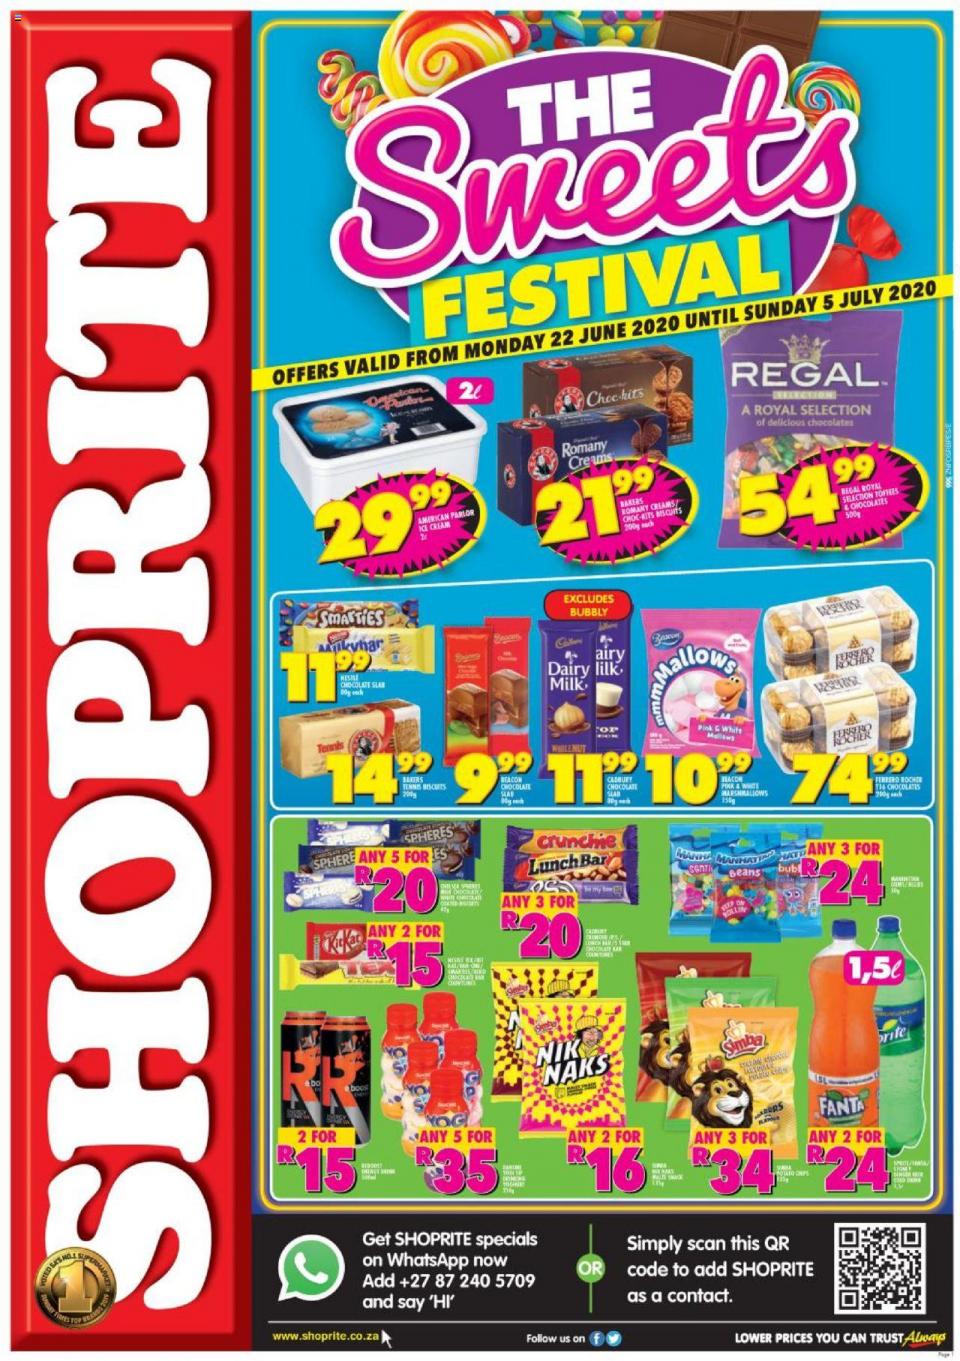 Shoprite Specials The Sweets Festival 22 June 2020